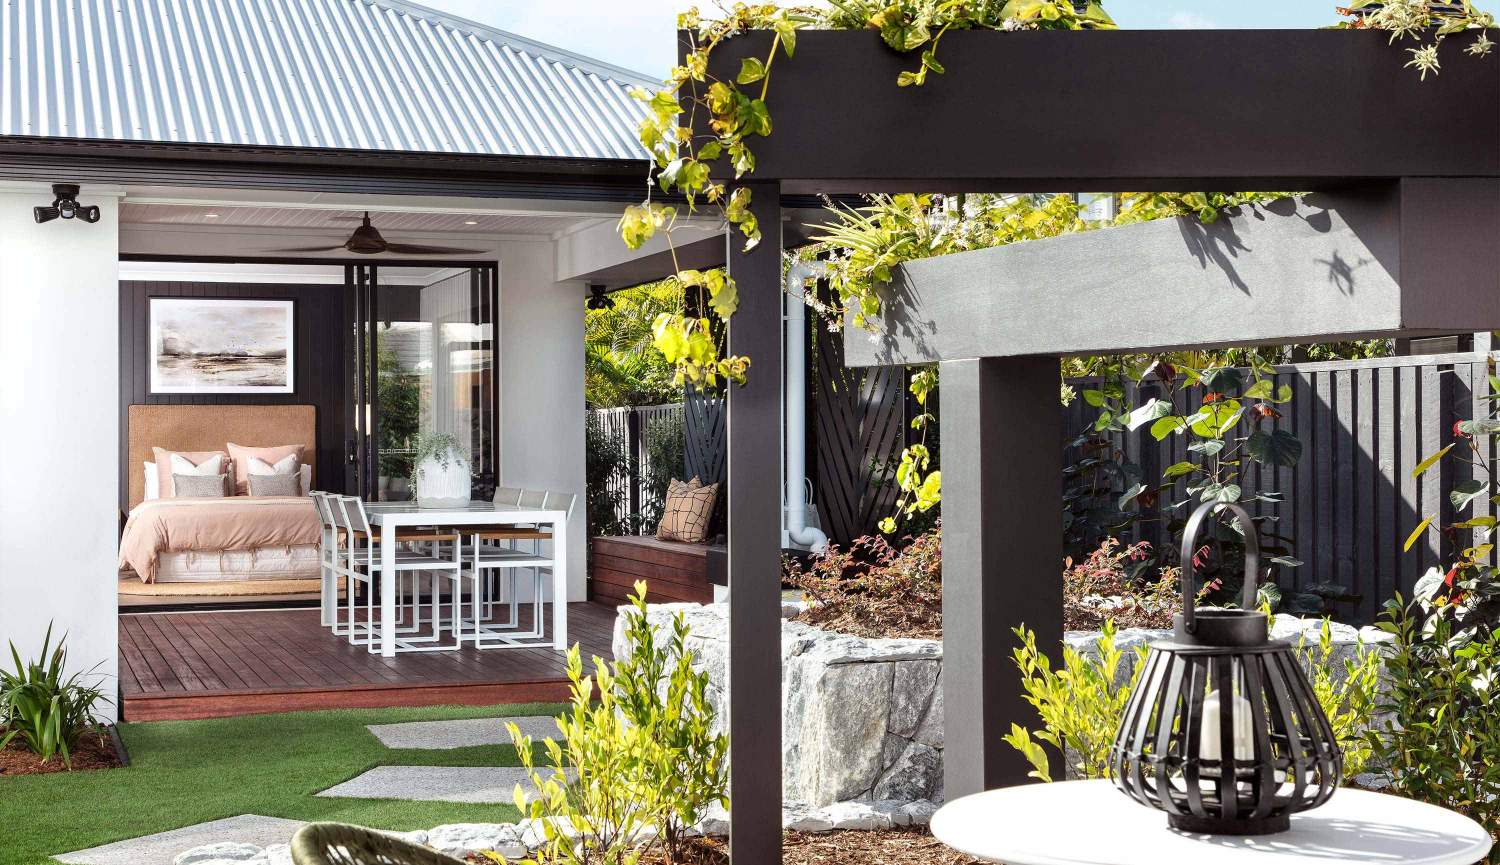 Melody Single Storey House Design Outdoor Living